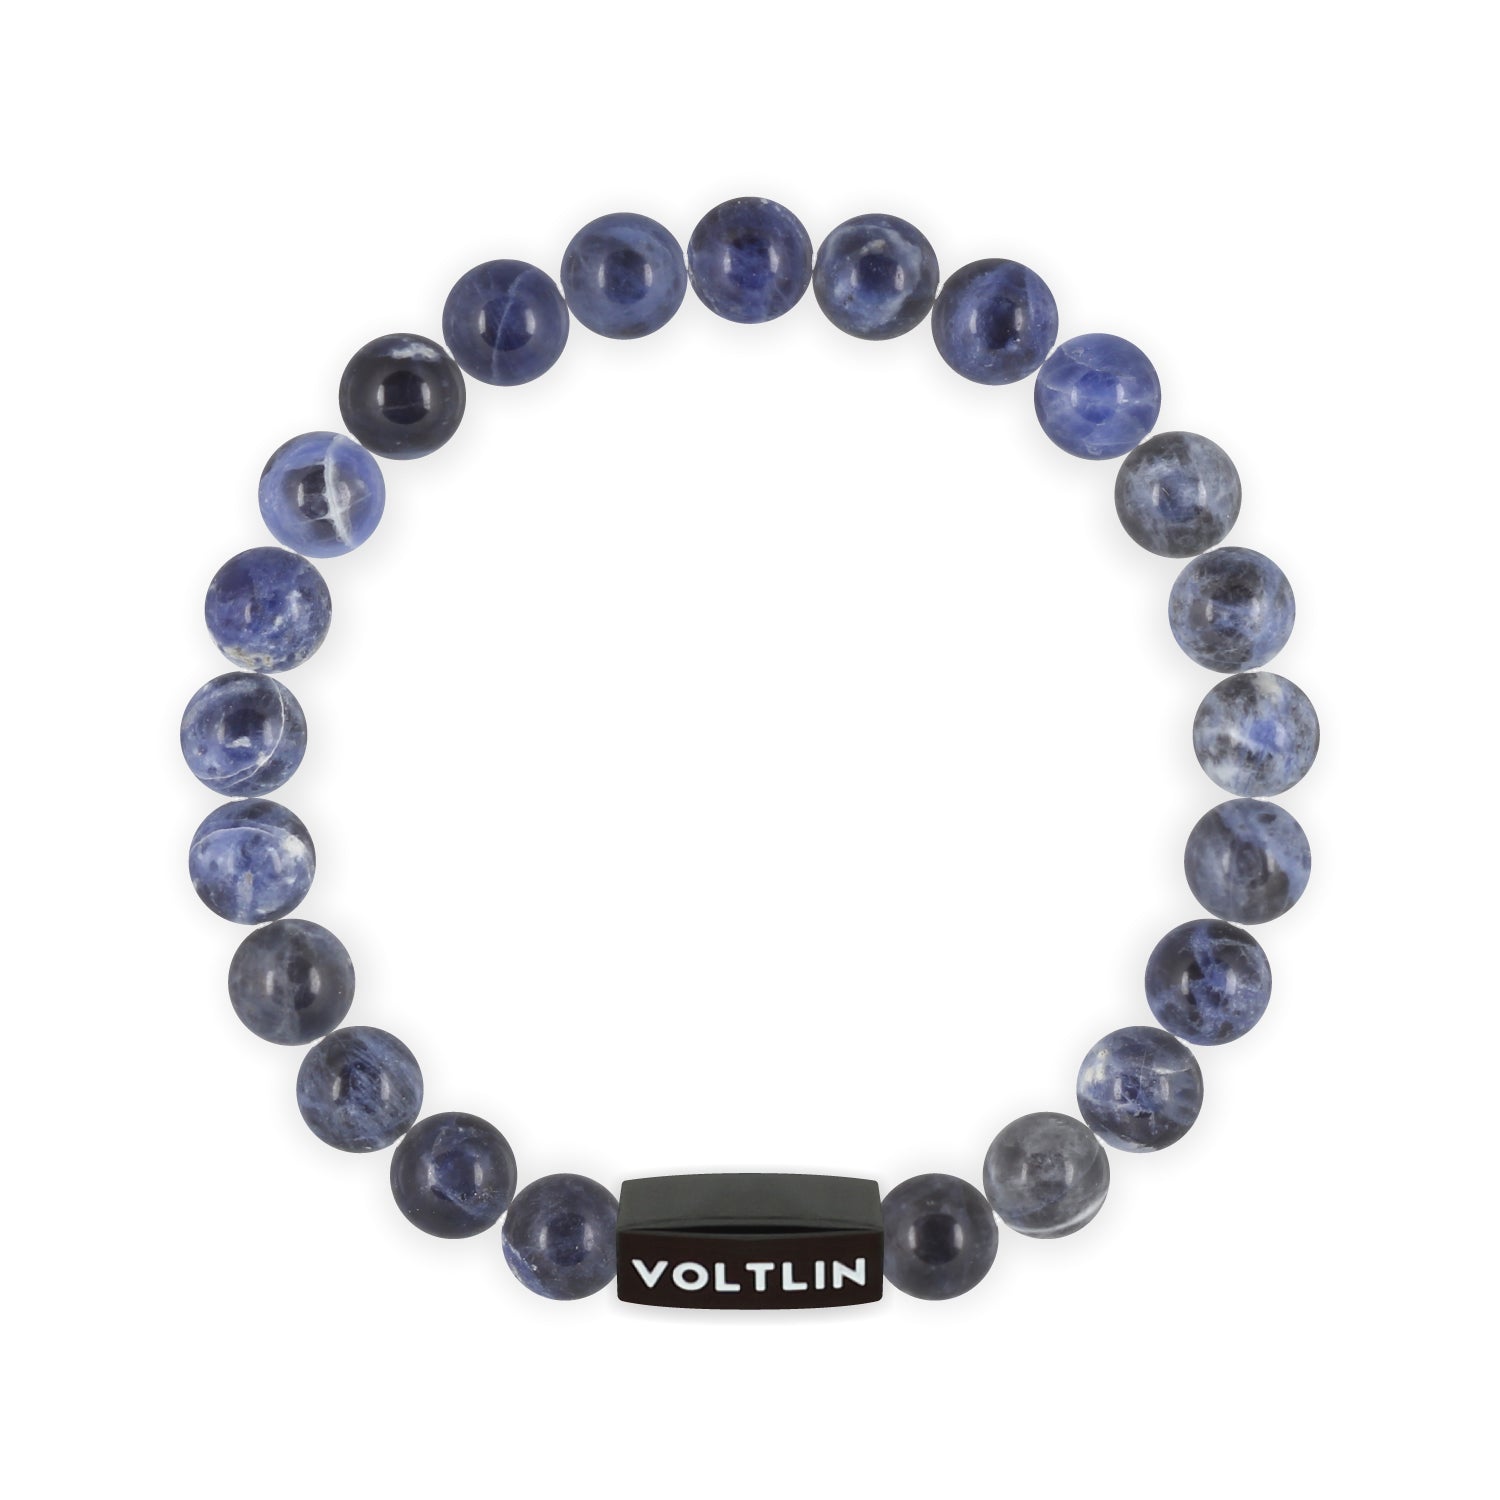 Front view of an 8mm Sodalite crystal beaded stretch bracelet with black stainless steel logo bead made by Voltlin